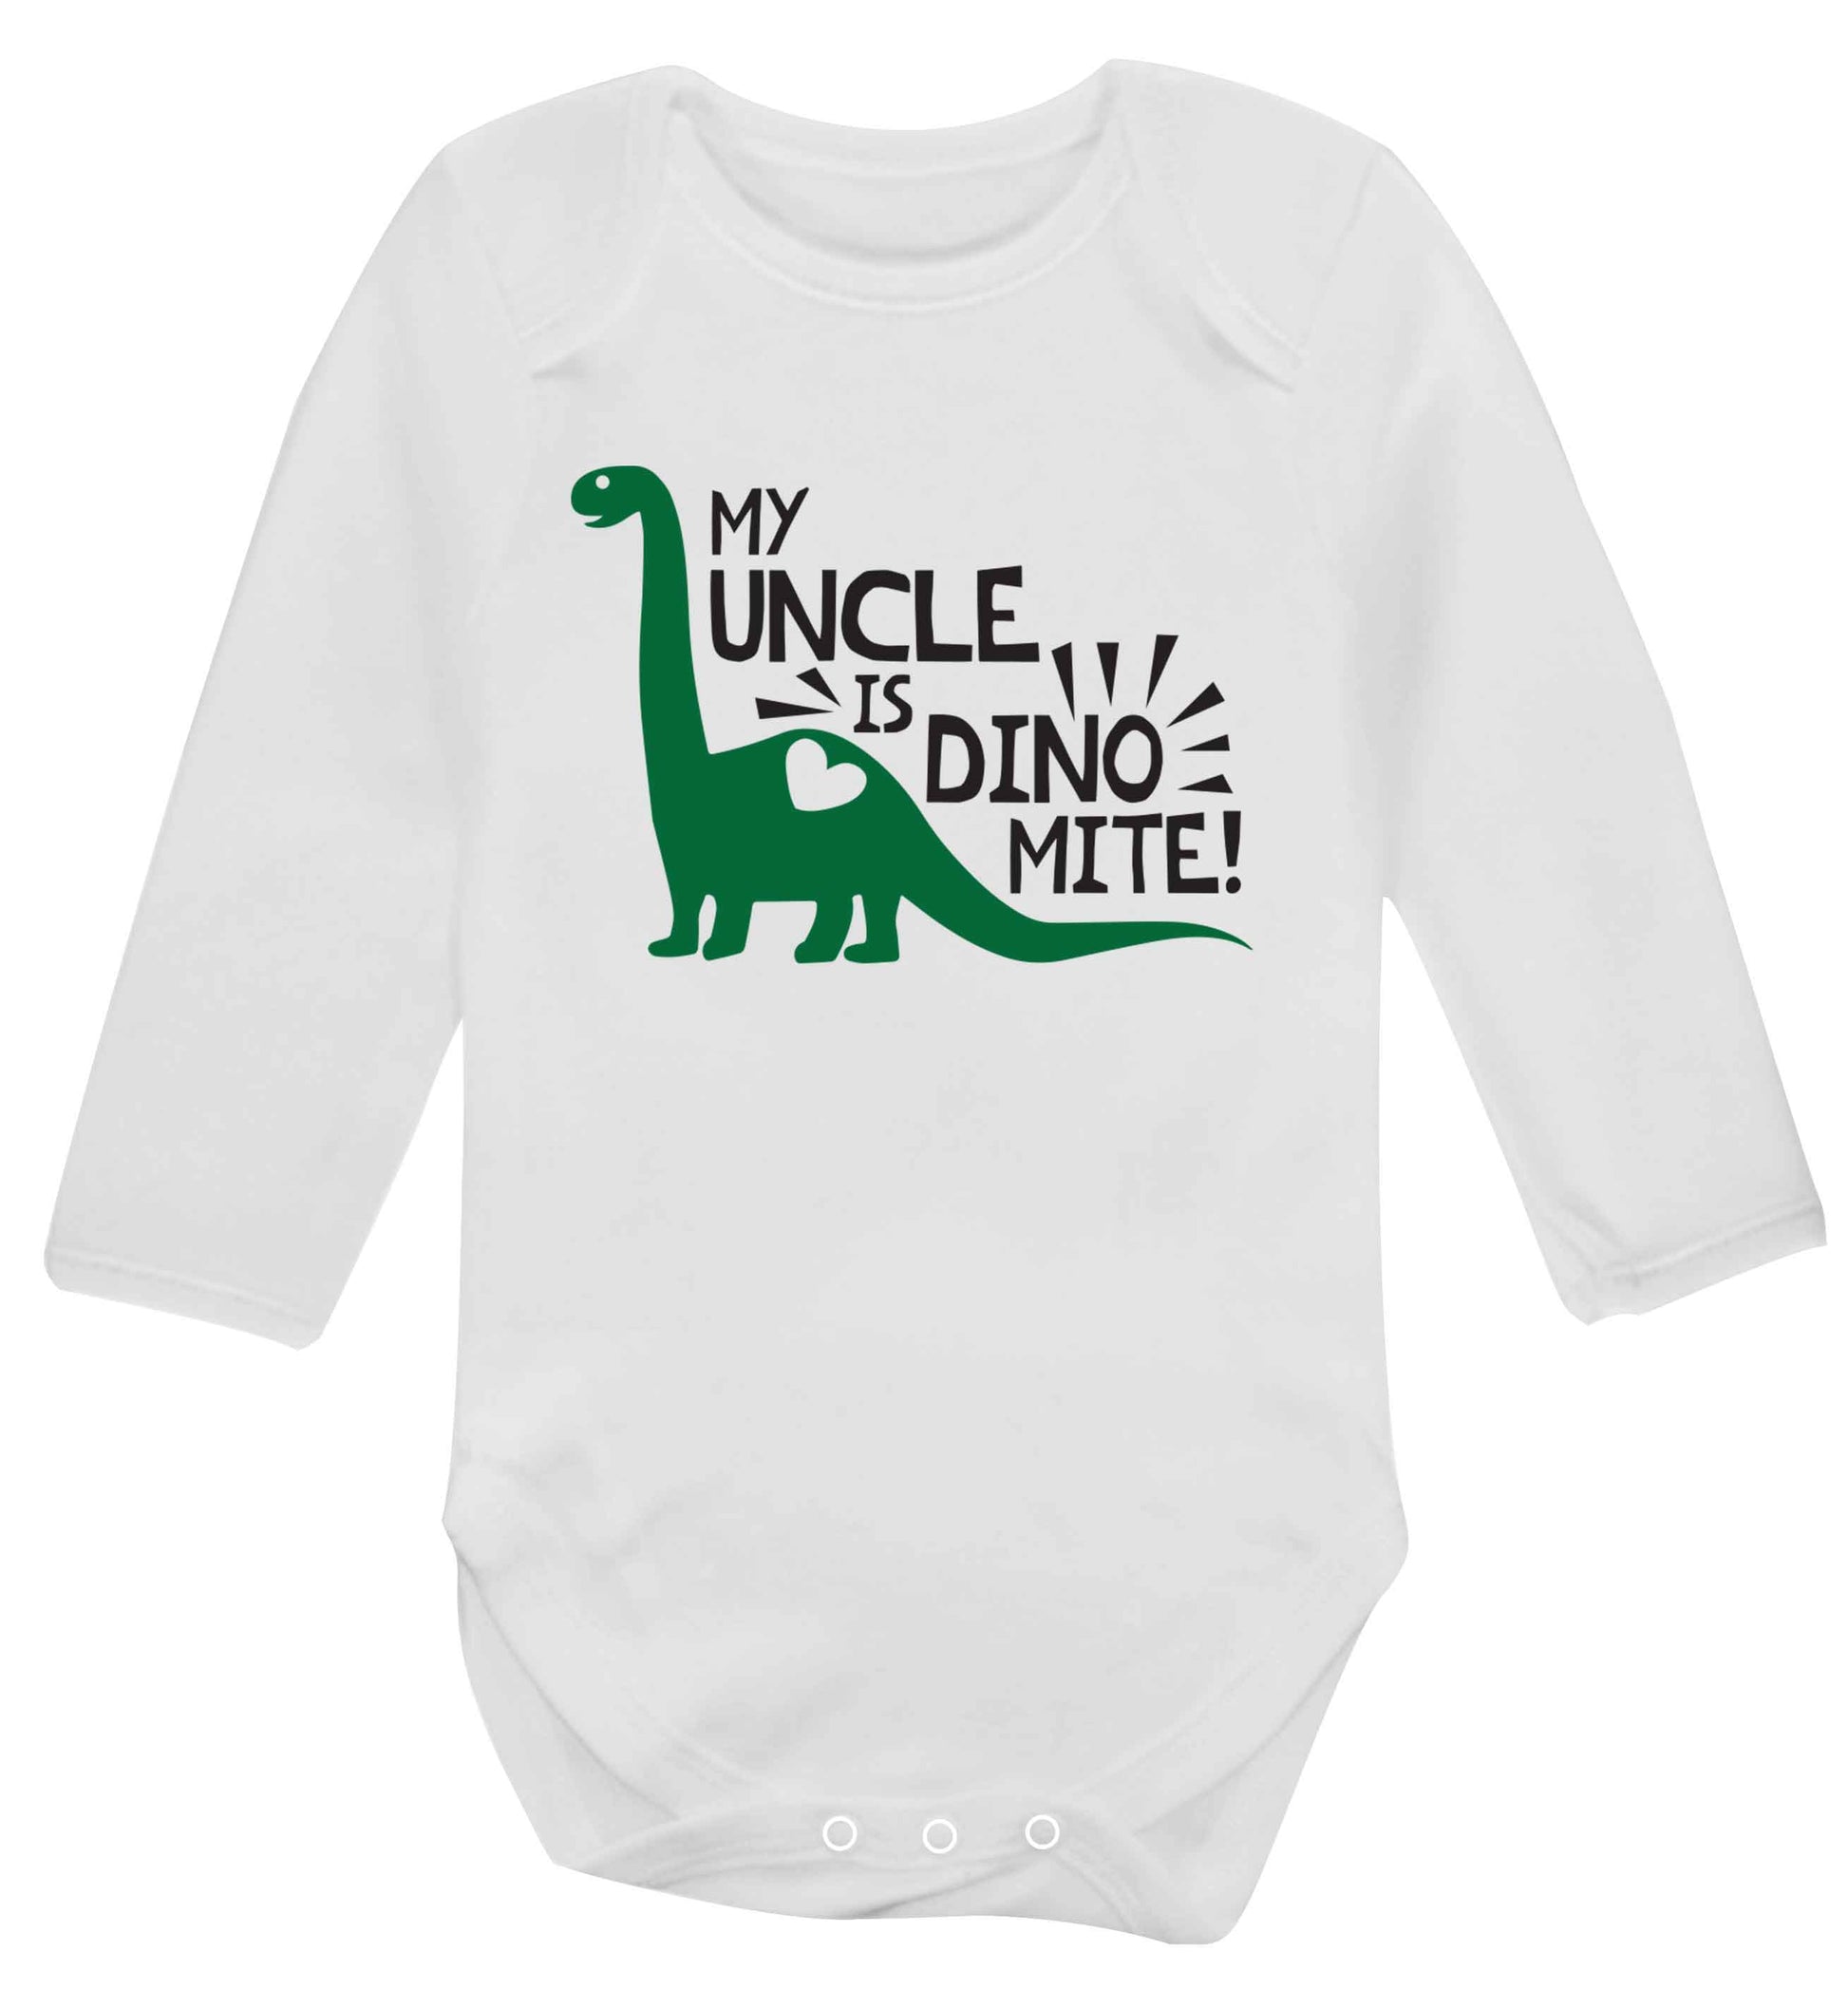 My uncle is dinomite! Baby Vest long sleeved white 6-12 months